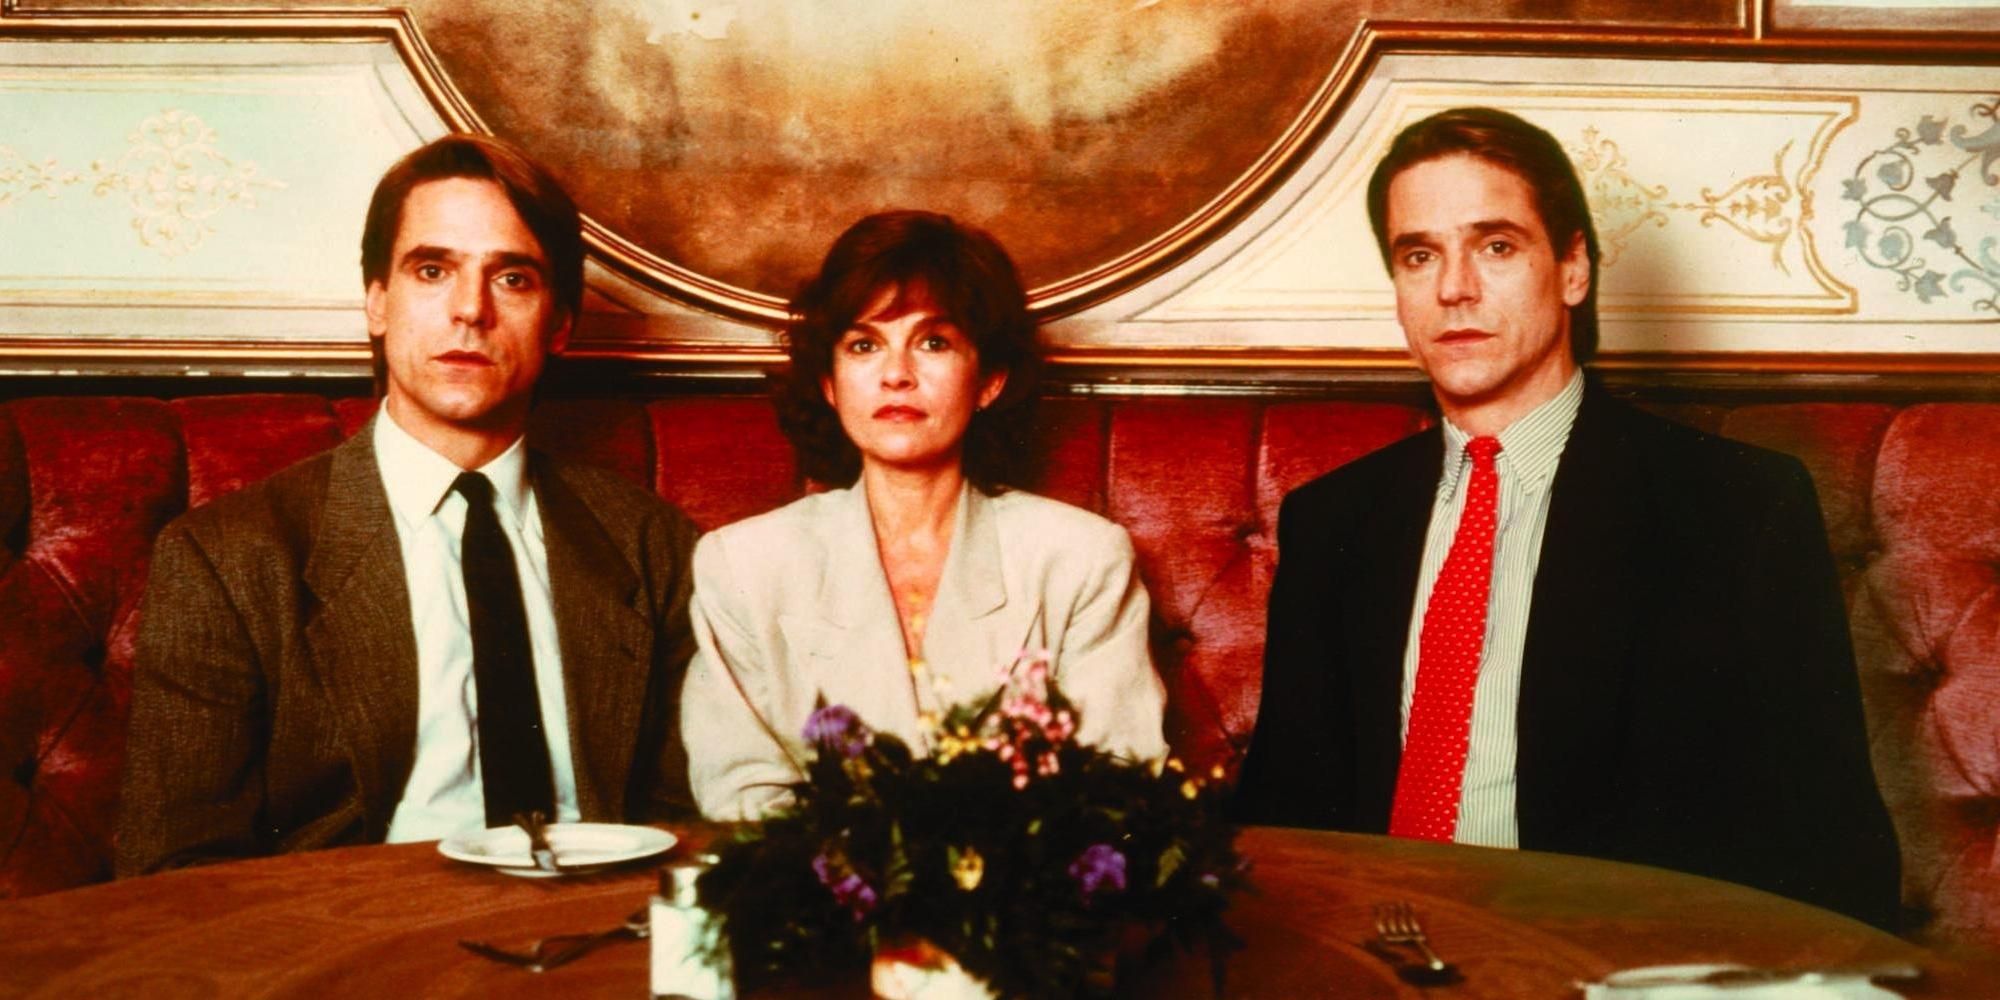 Jeremy Irons plays twins in Dead Ringers